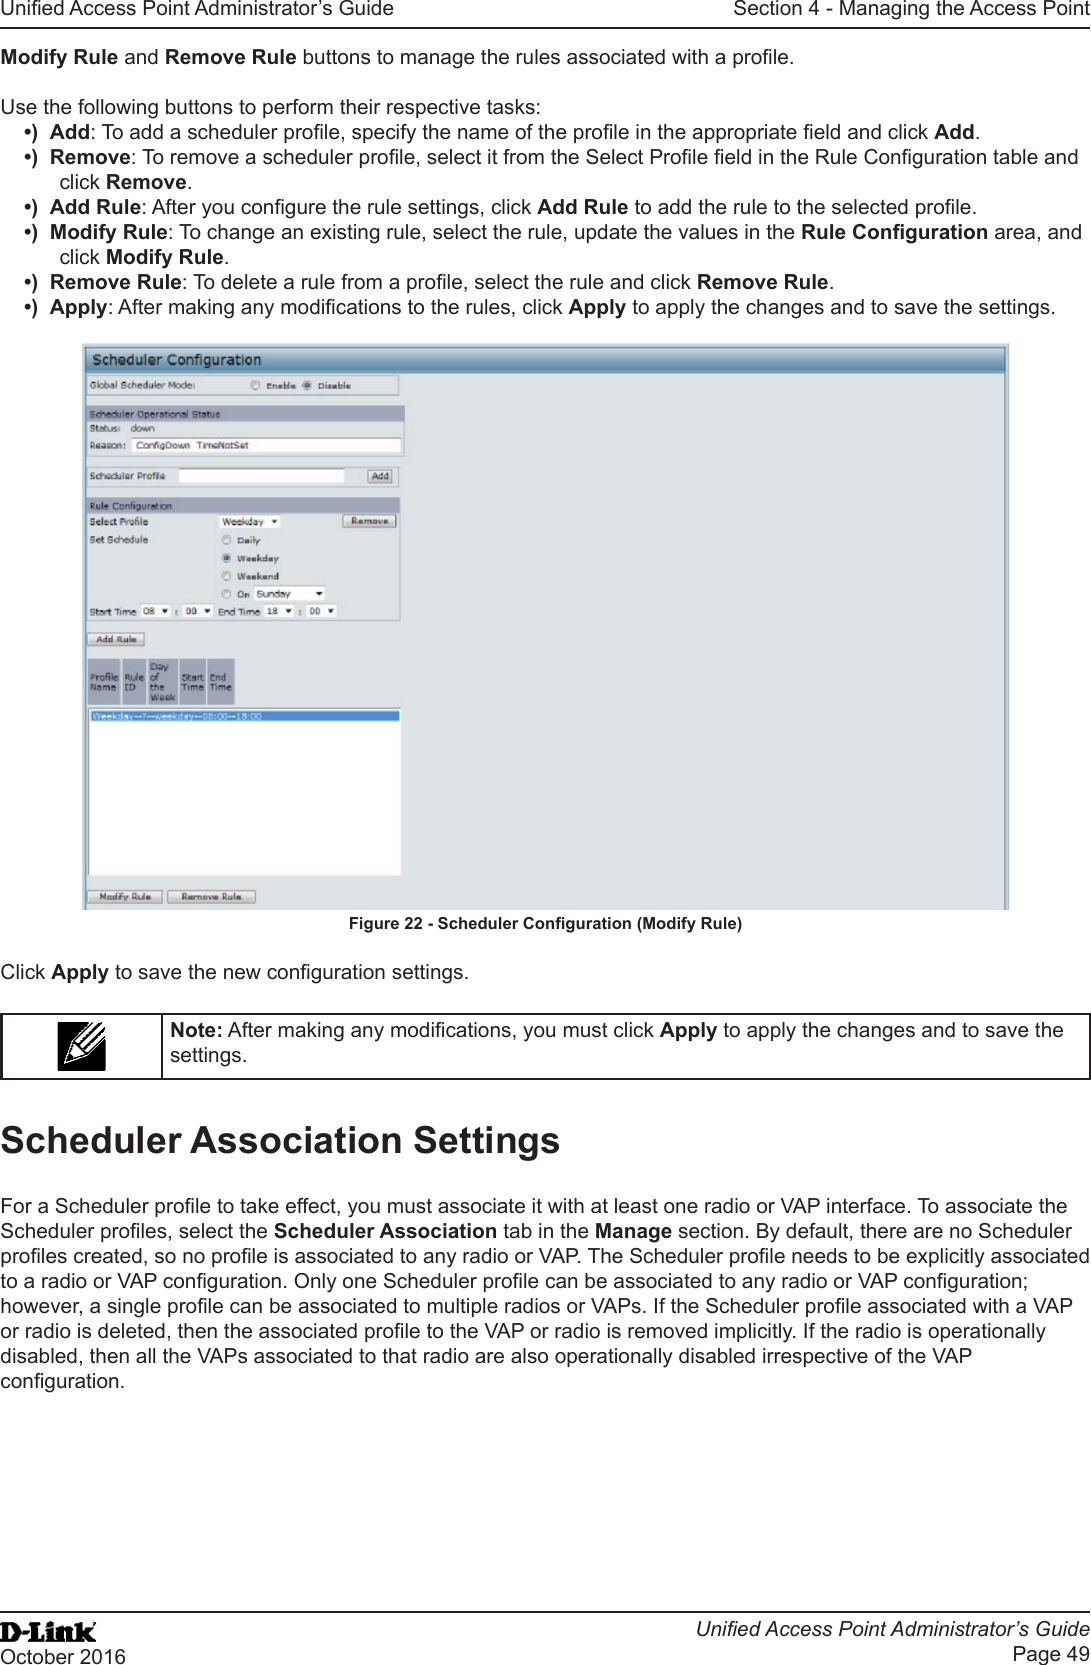 Unied Access Point Administrator’s GuideUnied Access Point Administrator’s GuidePage 49October 2016Section 4 - Managing the Access PointModify Rule and Remove Rule buttons to manage the rules associated with a prole.Use the following buttons to perform their respective tasks:•)  Add: To add a scheduler prole, specify the name of the prole in the appropriate eld and click Add.•)  Remove: To remove a scheduler prole, select it from the Select Prole eld in the Rule Conguration table and click Remove.•)  Add Rule: After you congure the rule settings, click Add Rule to add the rule to the selected prole.•)  Modify Rule: To change an existing rule, select the rule, update the values in the Rule Conguration area, and click Modify Rule.•)  Remove Rule: To delete a rule from a prole, select the rule and click Remove Rule.•)  Apply: After making any modications to the rules, click Apply to apply the changes and to save the settings.Figure 22 - Scheduler Conguration (Modify Rule)Click Apply to save the new conguration settings.Note: After making any modications, you must click Apply to apply the changes and to save the settings.Scheduler Association SettingsFor a Scheduler prole to take effect, you must associate it with at least one radio or VAP interface. To associate the Scheduler proles, select the Scheduler Association tab in the Manage section. By default, there are no Scheduler proles created, so no prole is associated to any radio or VAP. The Scheduler prole needs to be explicitly associated to a radio or VAP conguration. Only one Scheduler prole can be associated to any radio or VAP conguration; however, a single prole can be associated to multiple radios or VAPs. If the Scheduler prole associated with a VAP or radio is deleted, then the associated prole to the VAP or radio is removed implicitly. If the radio is operationally disabled, then all the VAPs associated to that radio are also operationally disabled irrespective of the VAP conguration.